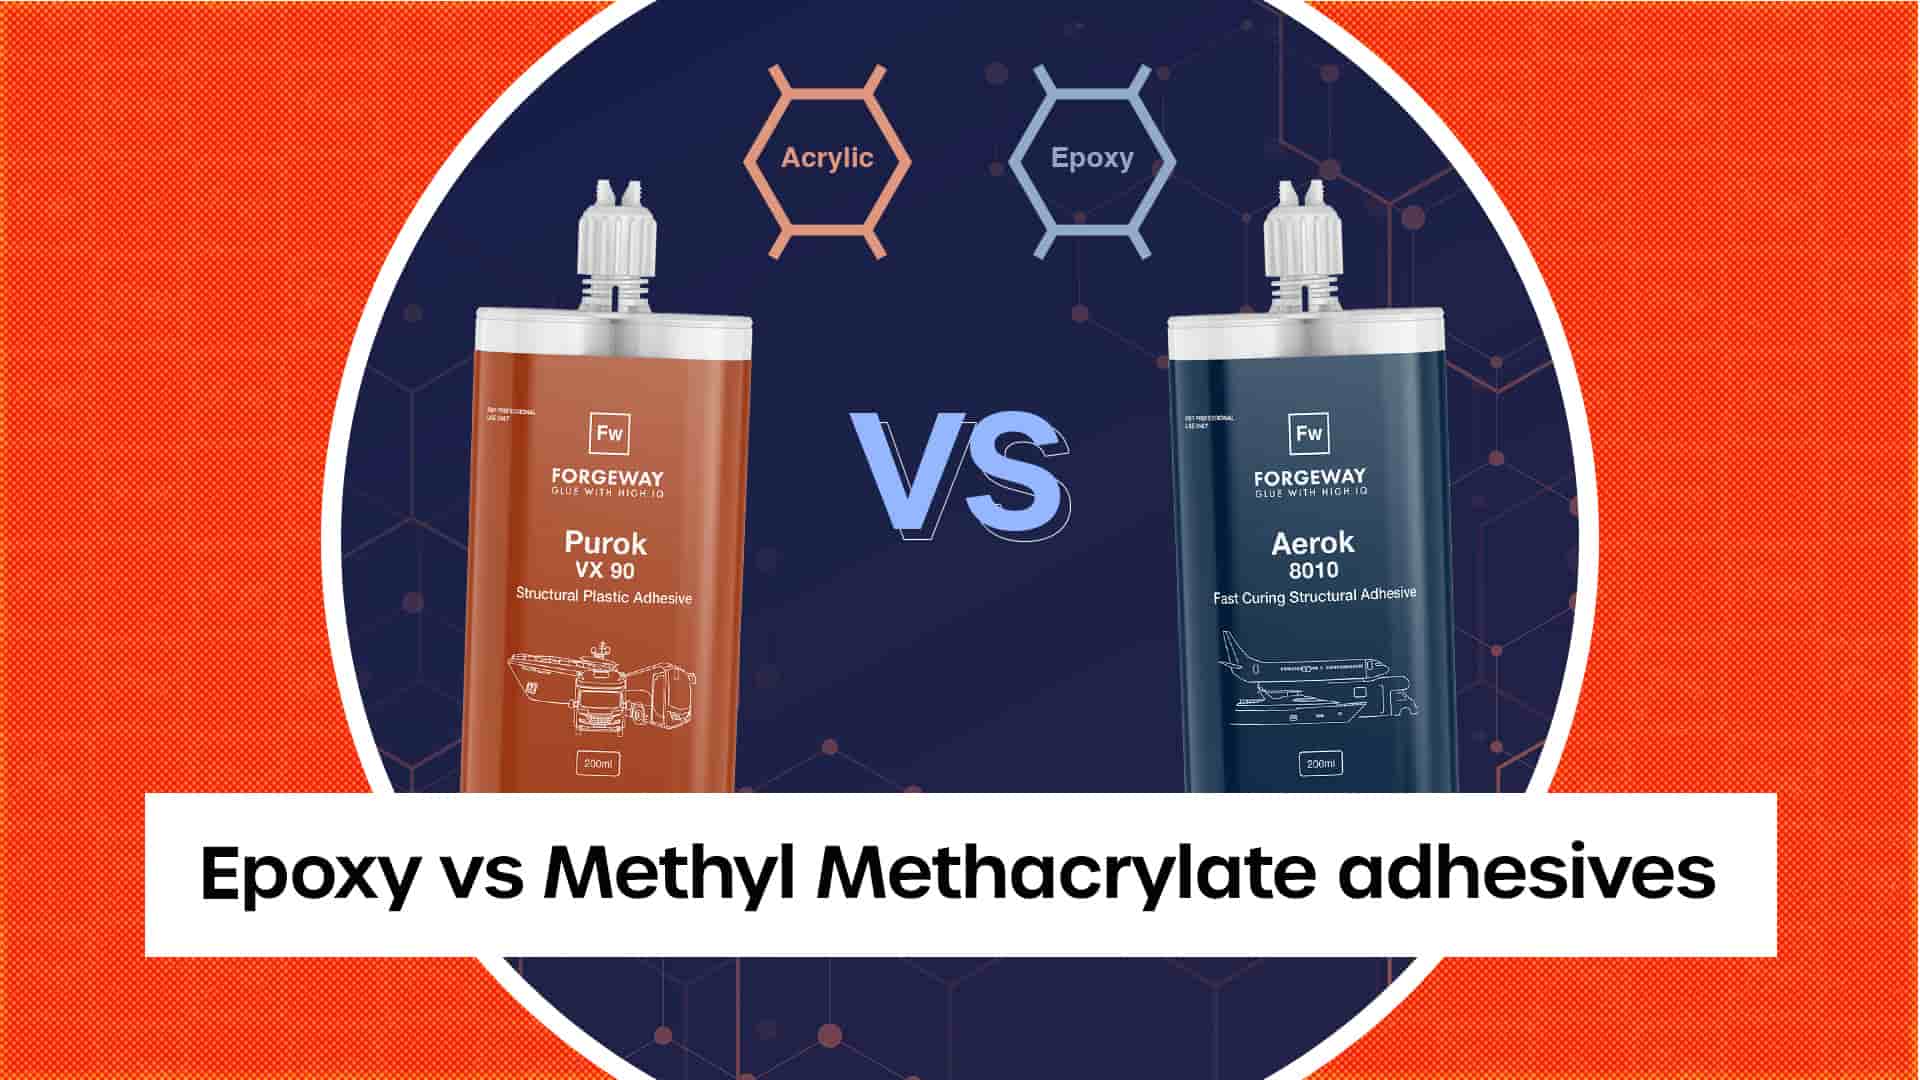 Epoxy adhesives vs methyl methacrylate adhesives; Which is right for you